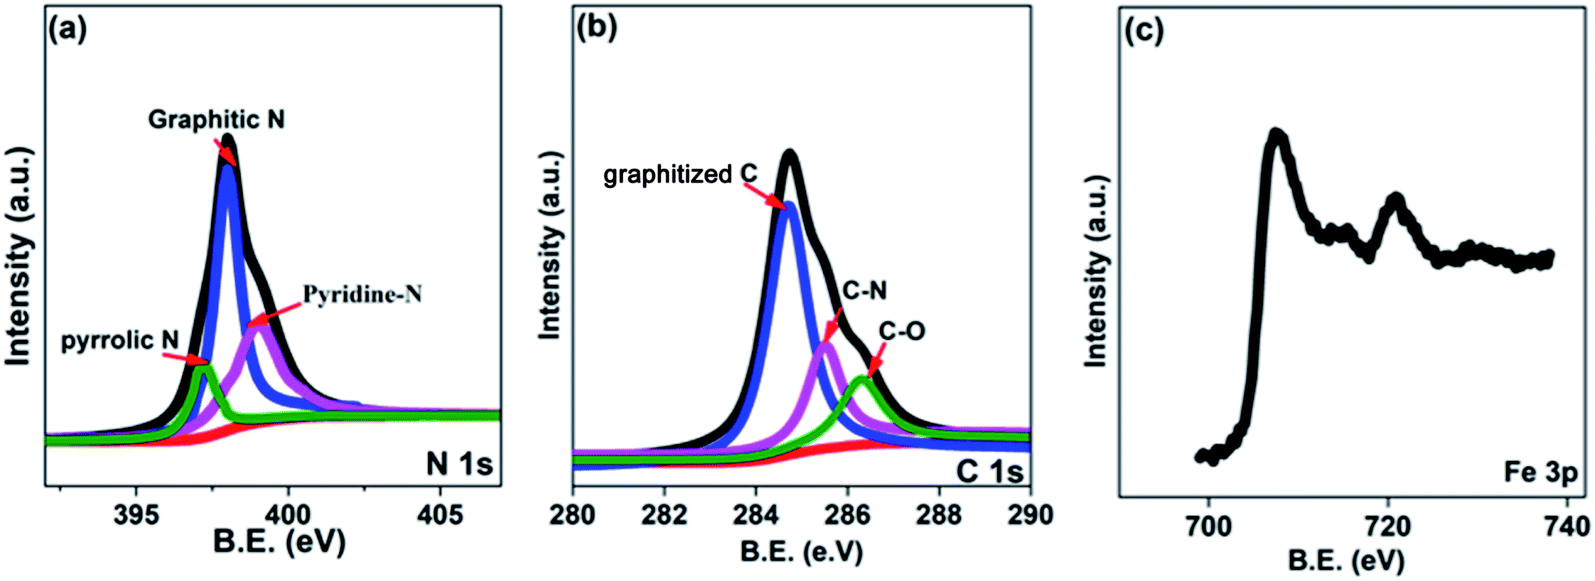 The Development Of A Magnetic Iron Nitrogen Doped Graphitized Carbon Composite With Boosted Microwave Attenuation Ability As The Wideband Microwave Ab Nanoscale Advances Rsc Publishing Doi 10 1039 D0nag